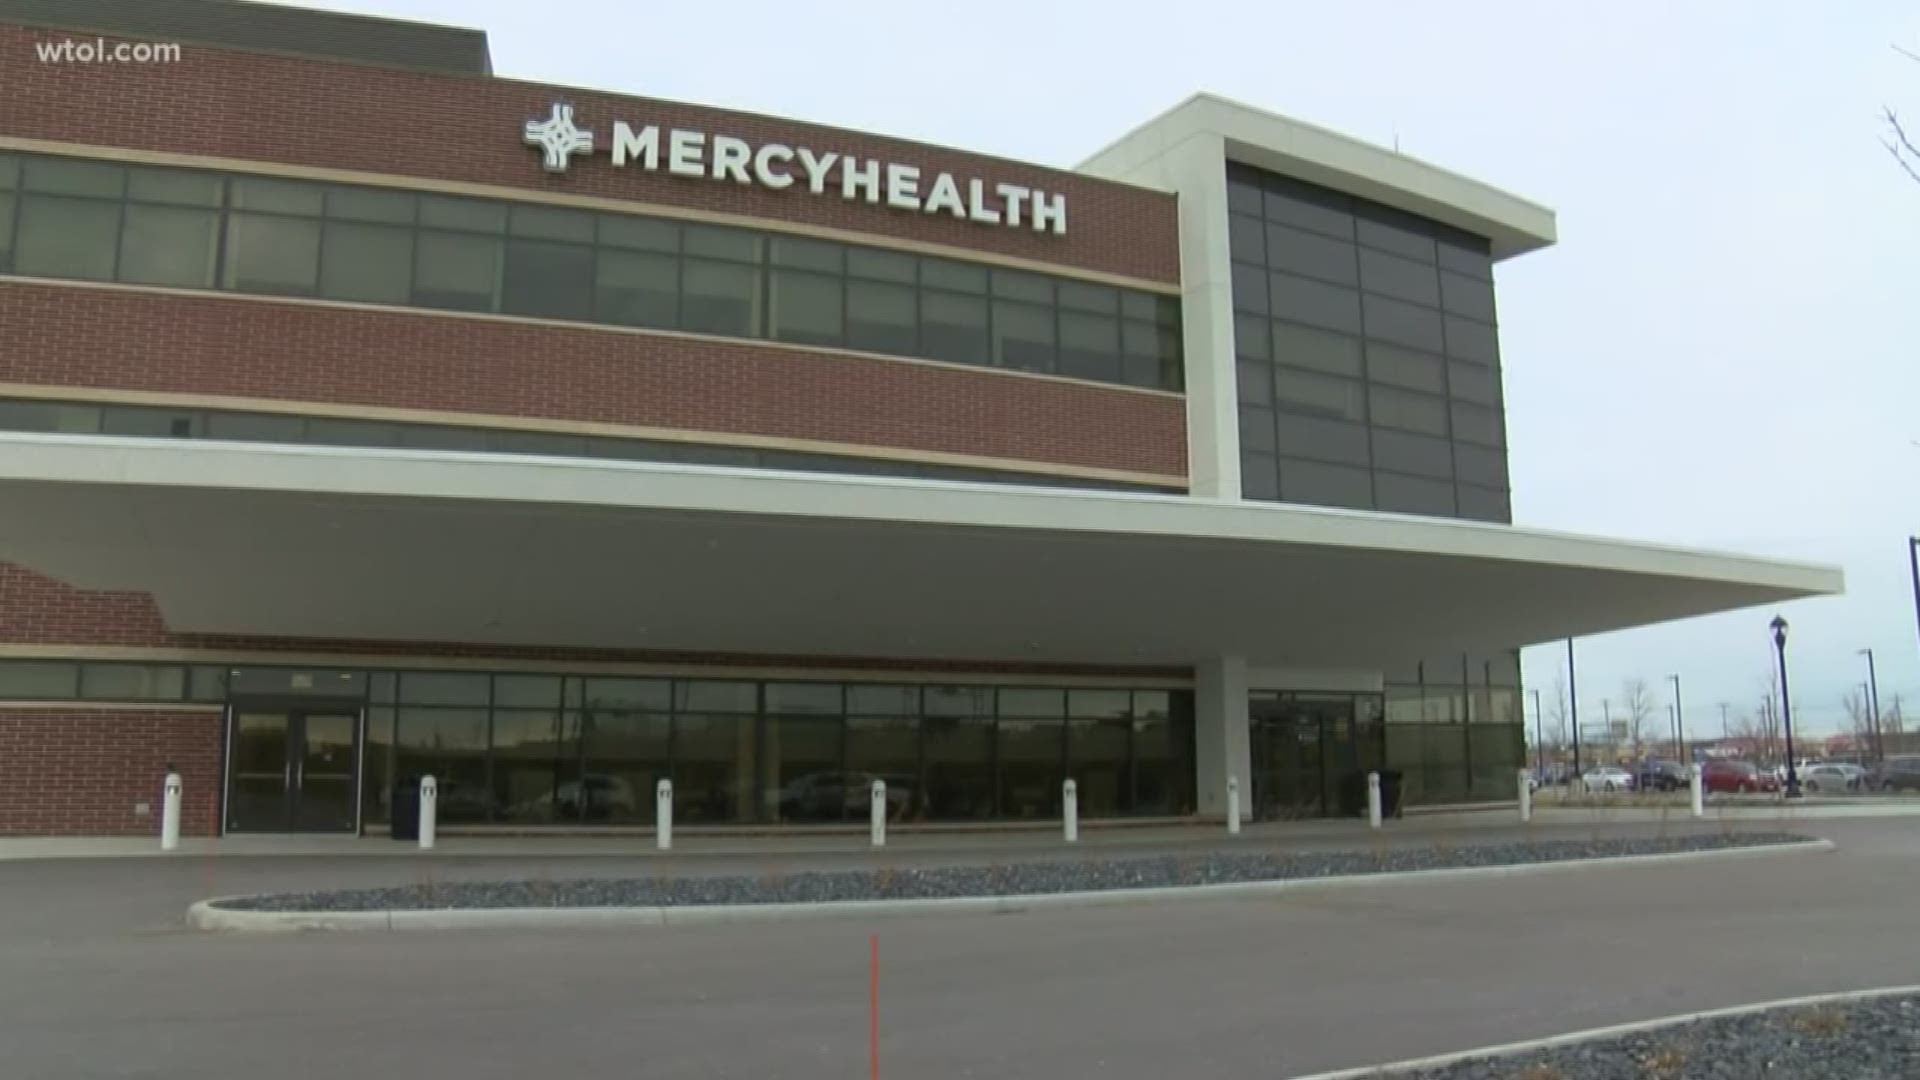 It's that time where illnesses are more prevalent, especially RSV. Some local hospitals are already reporting babies hospitalized with the virus.